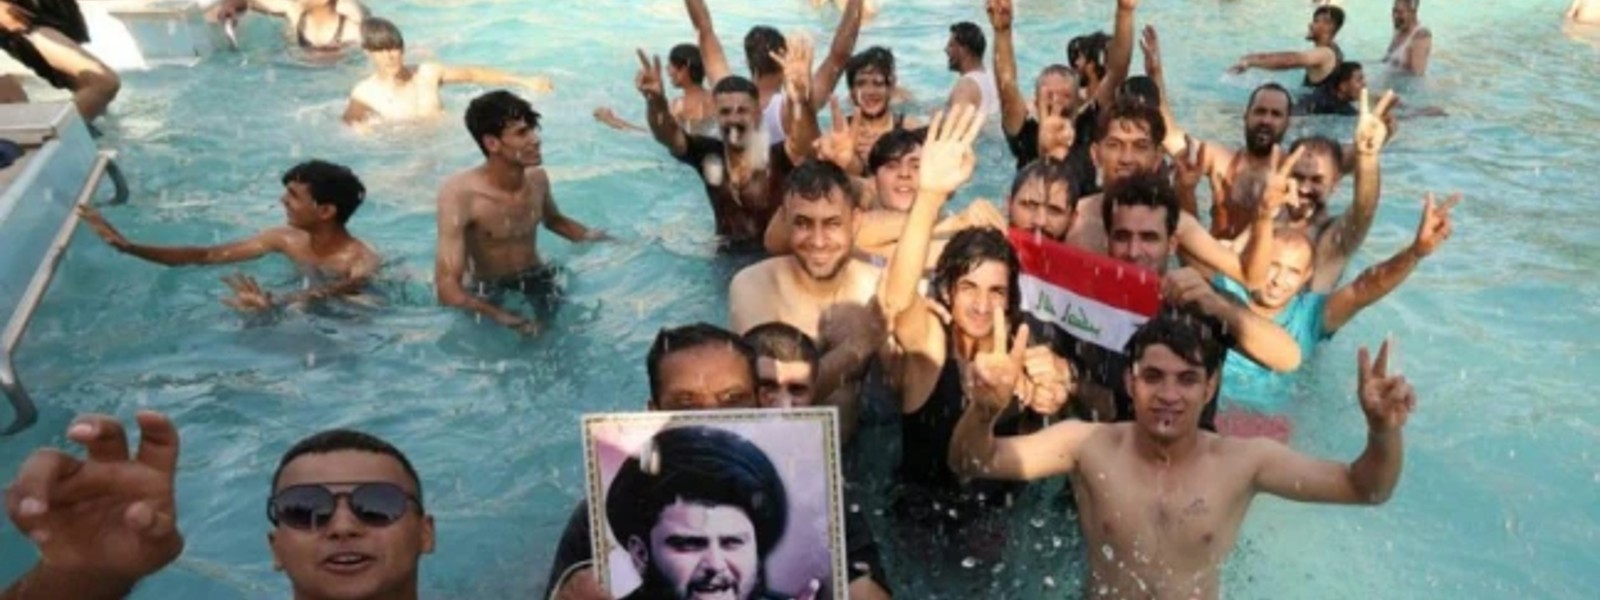 Pool Party in Iraq’s Presidential Palace by protestors